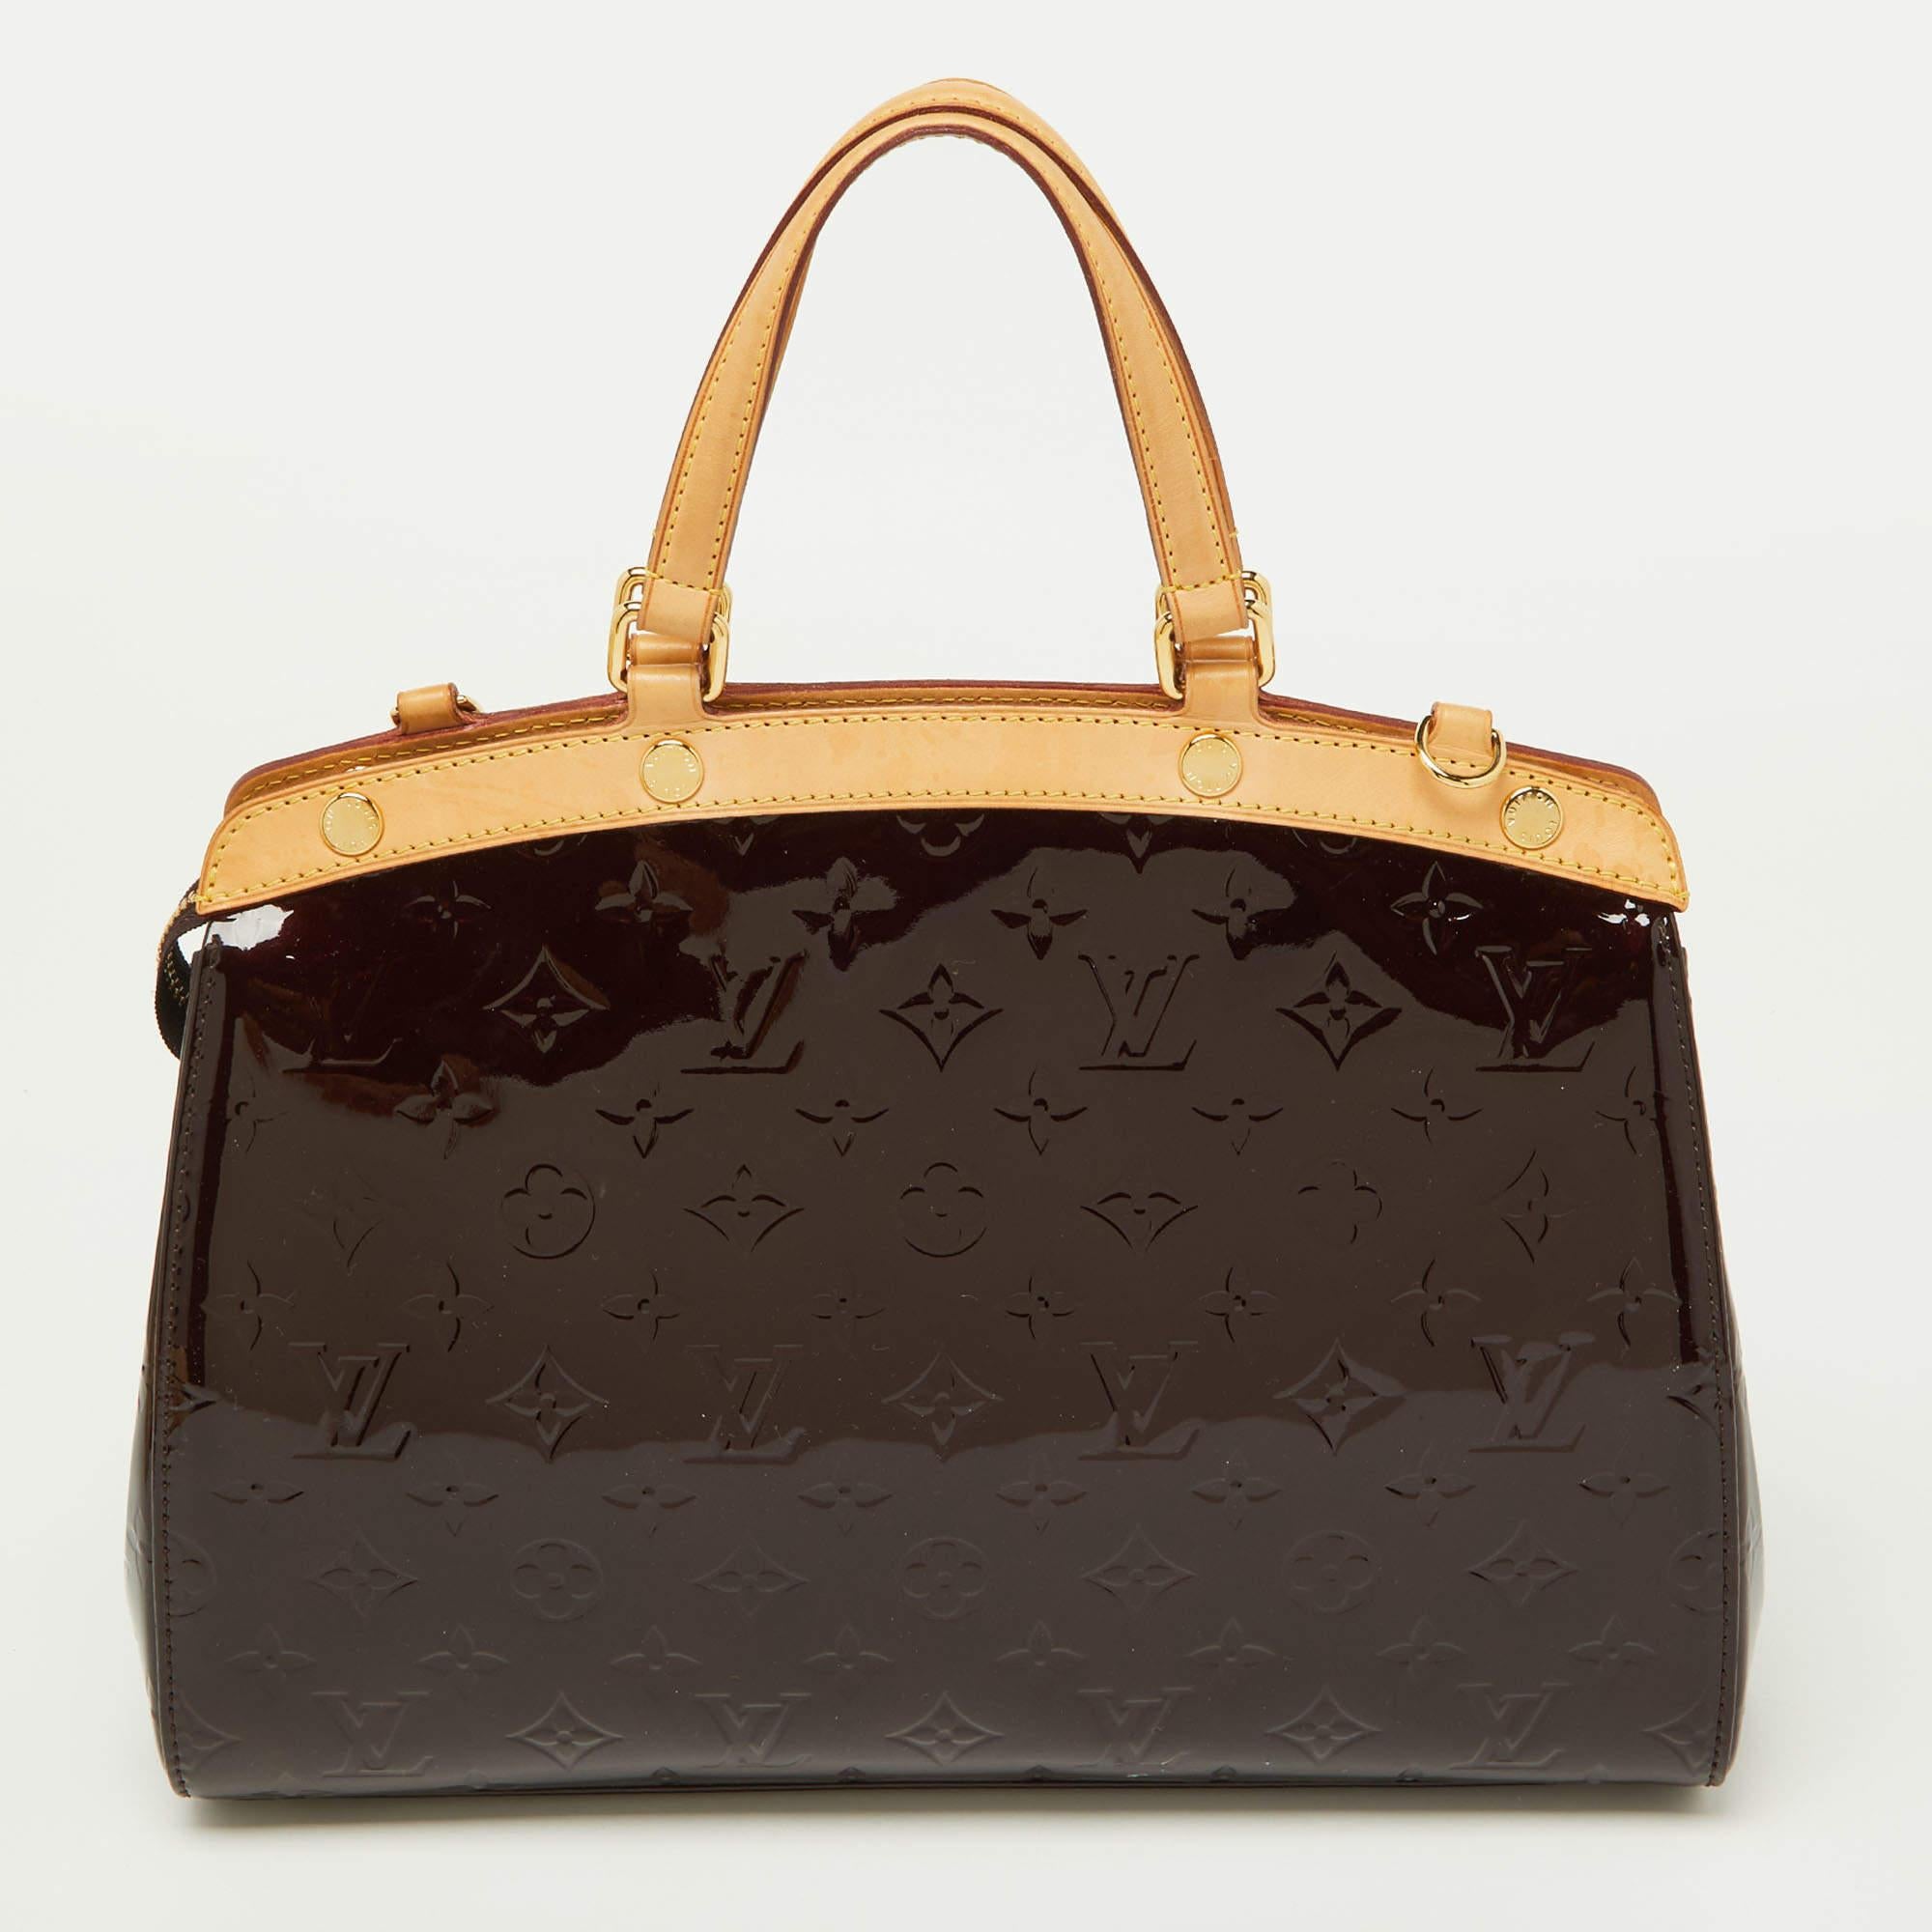 A classic handbag comes with the promise of enduring appeal, boosting your style time and again. This LV Brea bag is one such creation. It’s a fine purchase.

Includes: Original Dustbag, Detachable Strap

